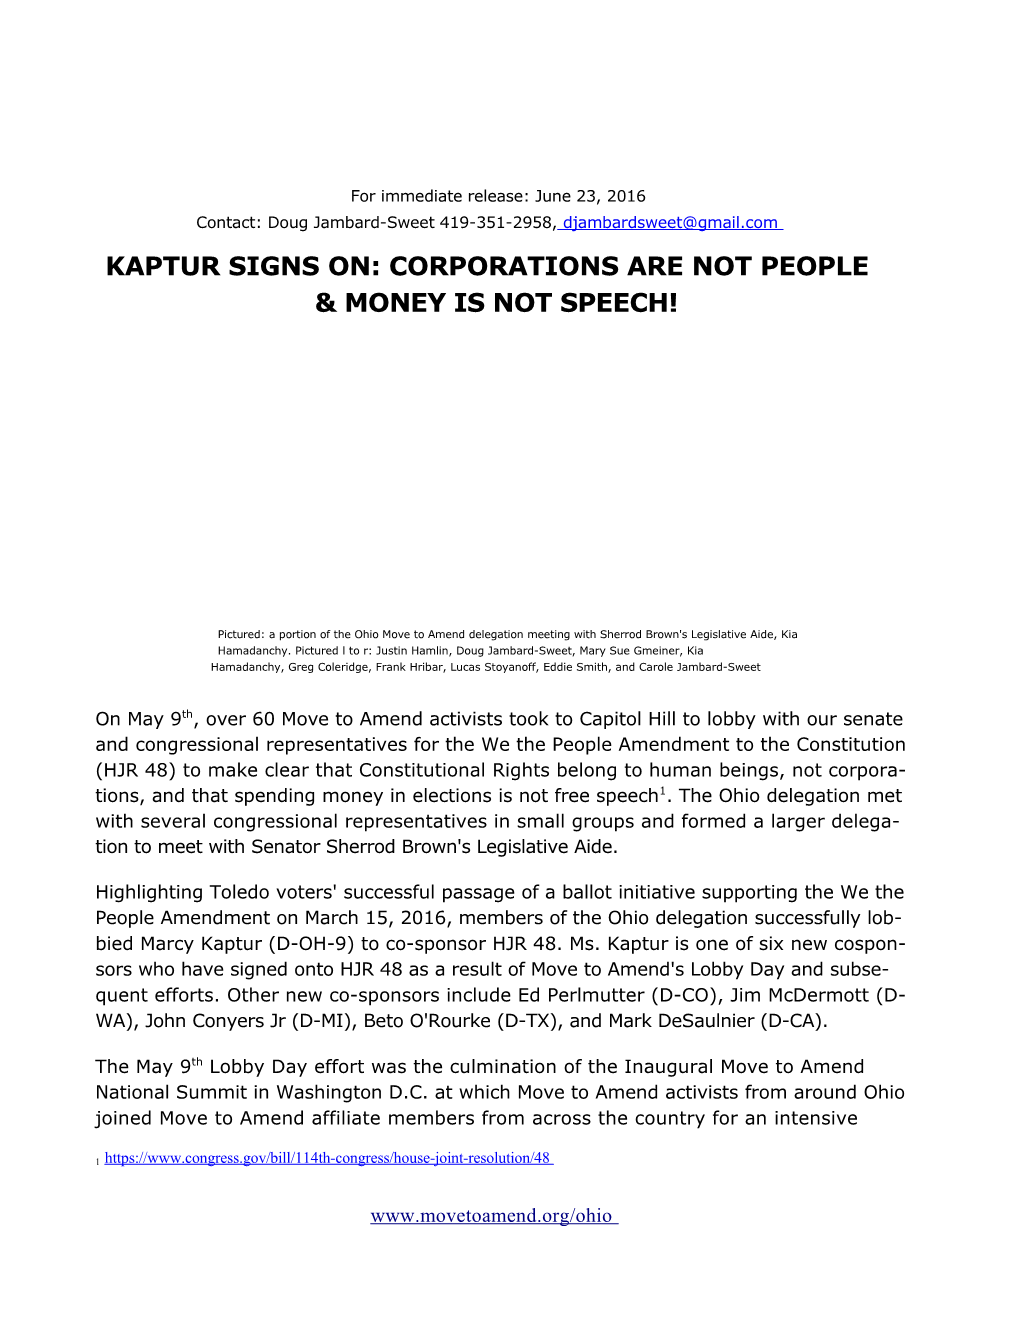 Kaptur Signs On: Corporations Are Not People